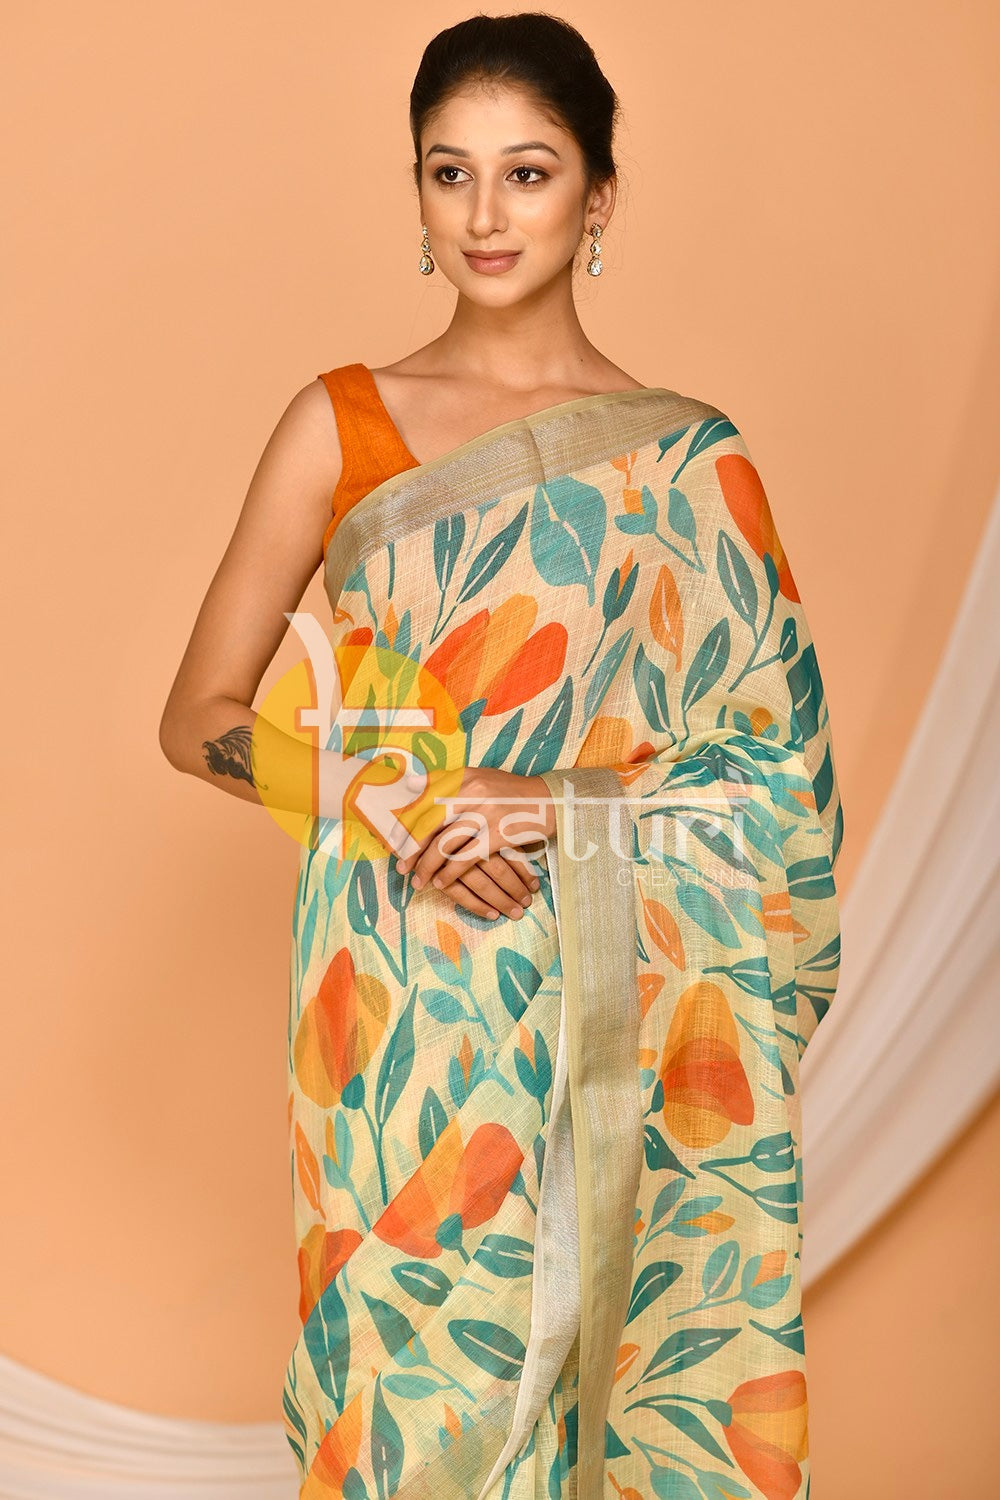 Pale yellow flower and leaf pattern handloom linen saree